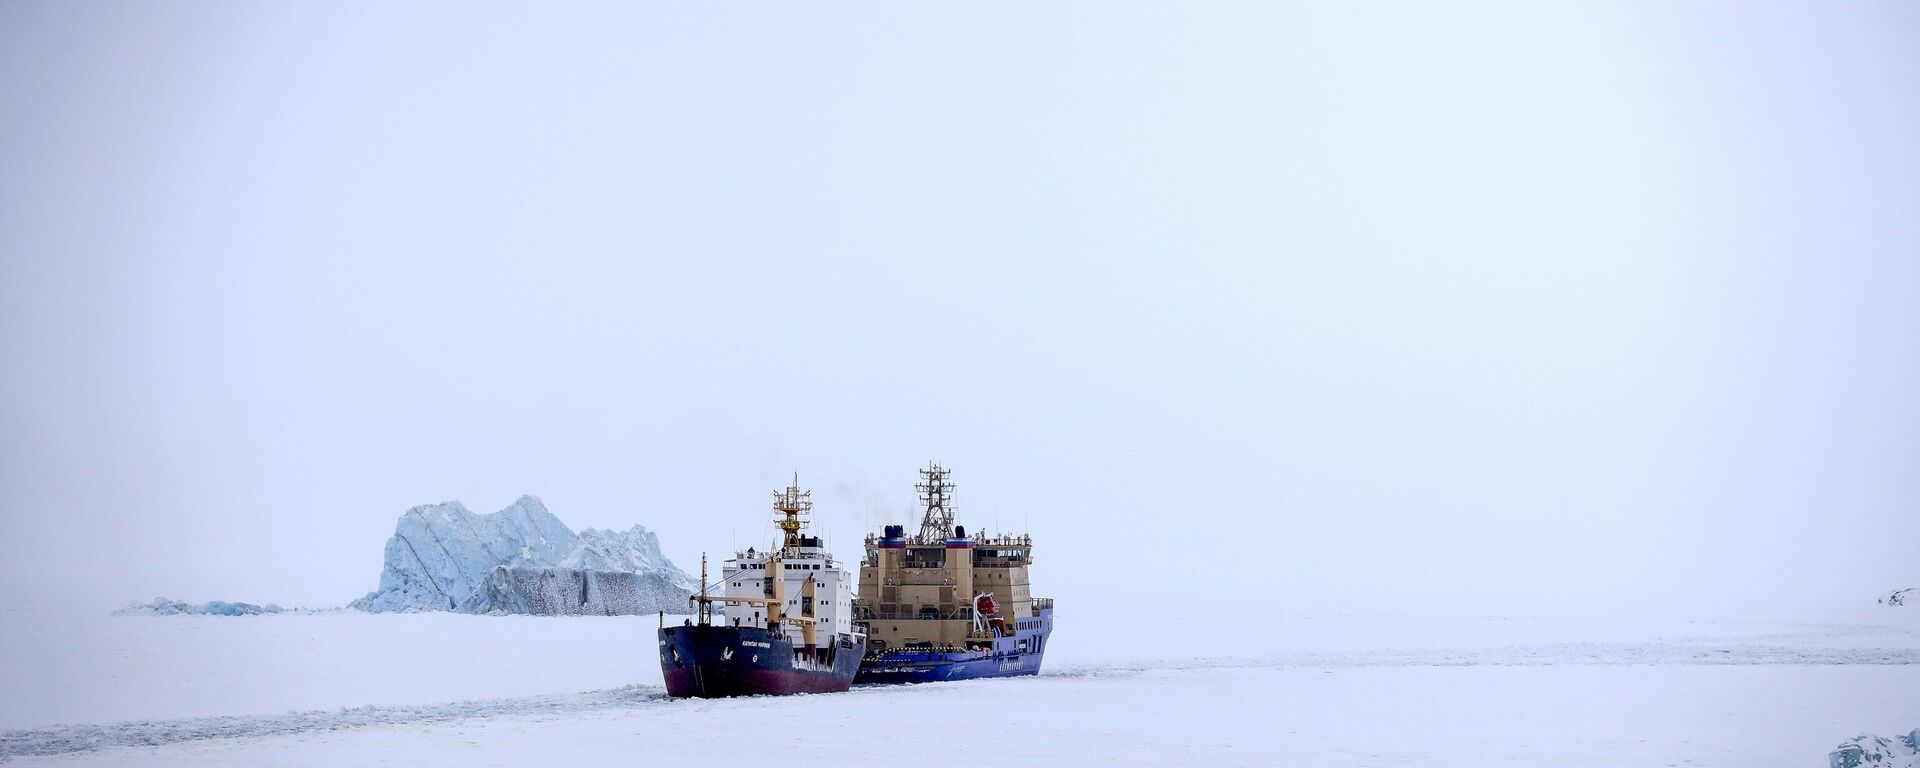 An Icebreaker making the path for a cargo ship with an iceberg in the background near a port on the Alexandra Land island near Nagurskoye, Russia, Monday, May 17, 2021. - Sputnik International, 1920, 17.05.2024